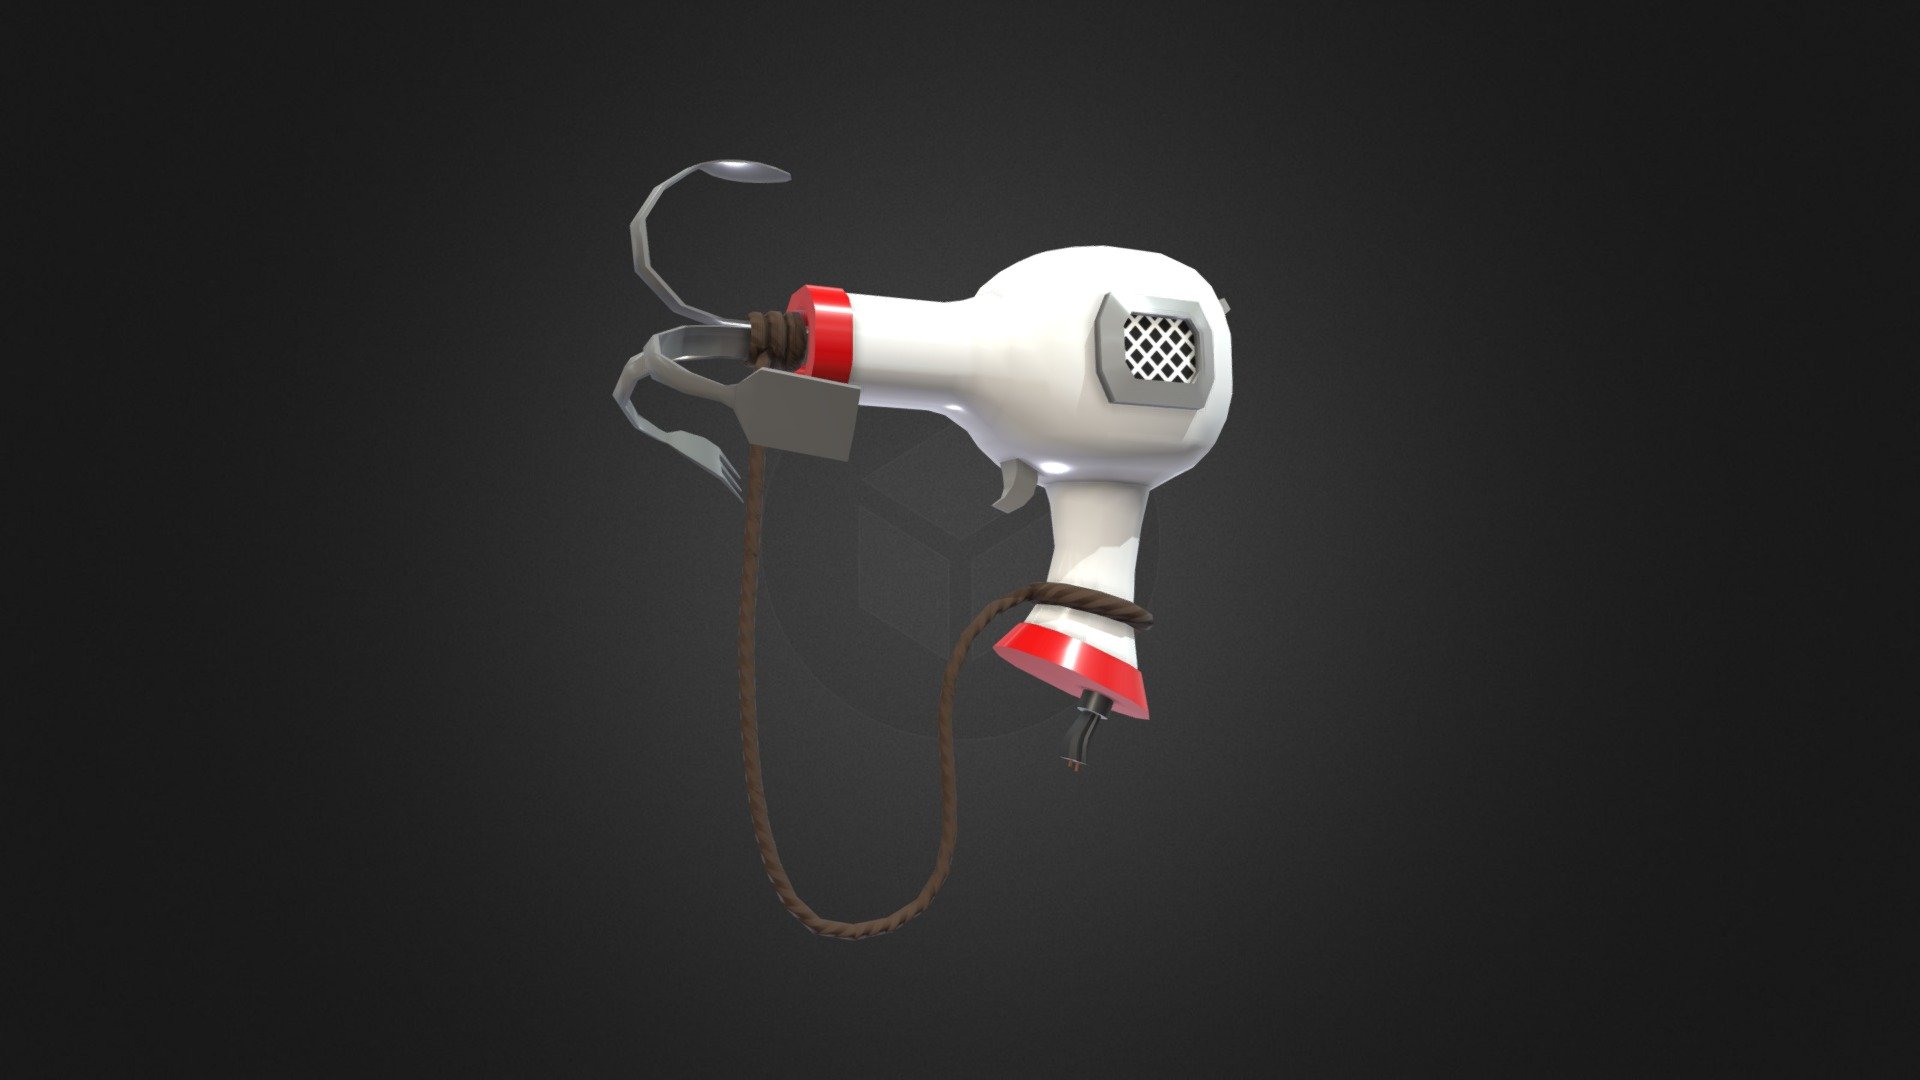 A cartoony grappling hook, made of a hairdryer and some kitchen utensils.

Modelled in Blender, and textured in Substance Painter 3d model